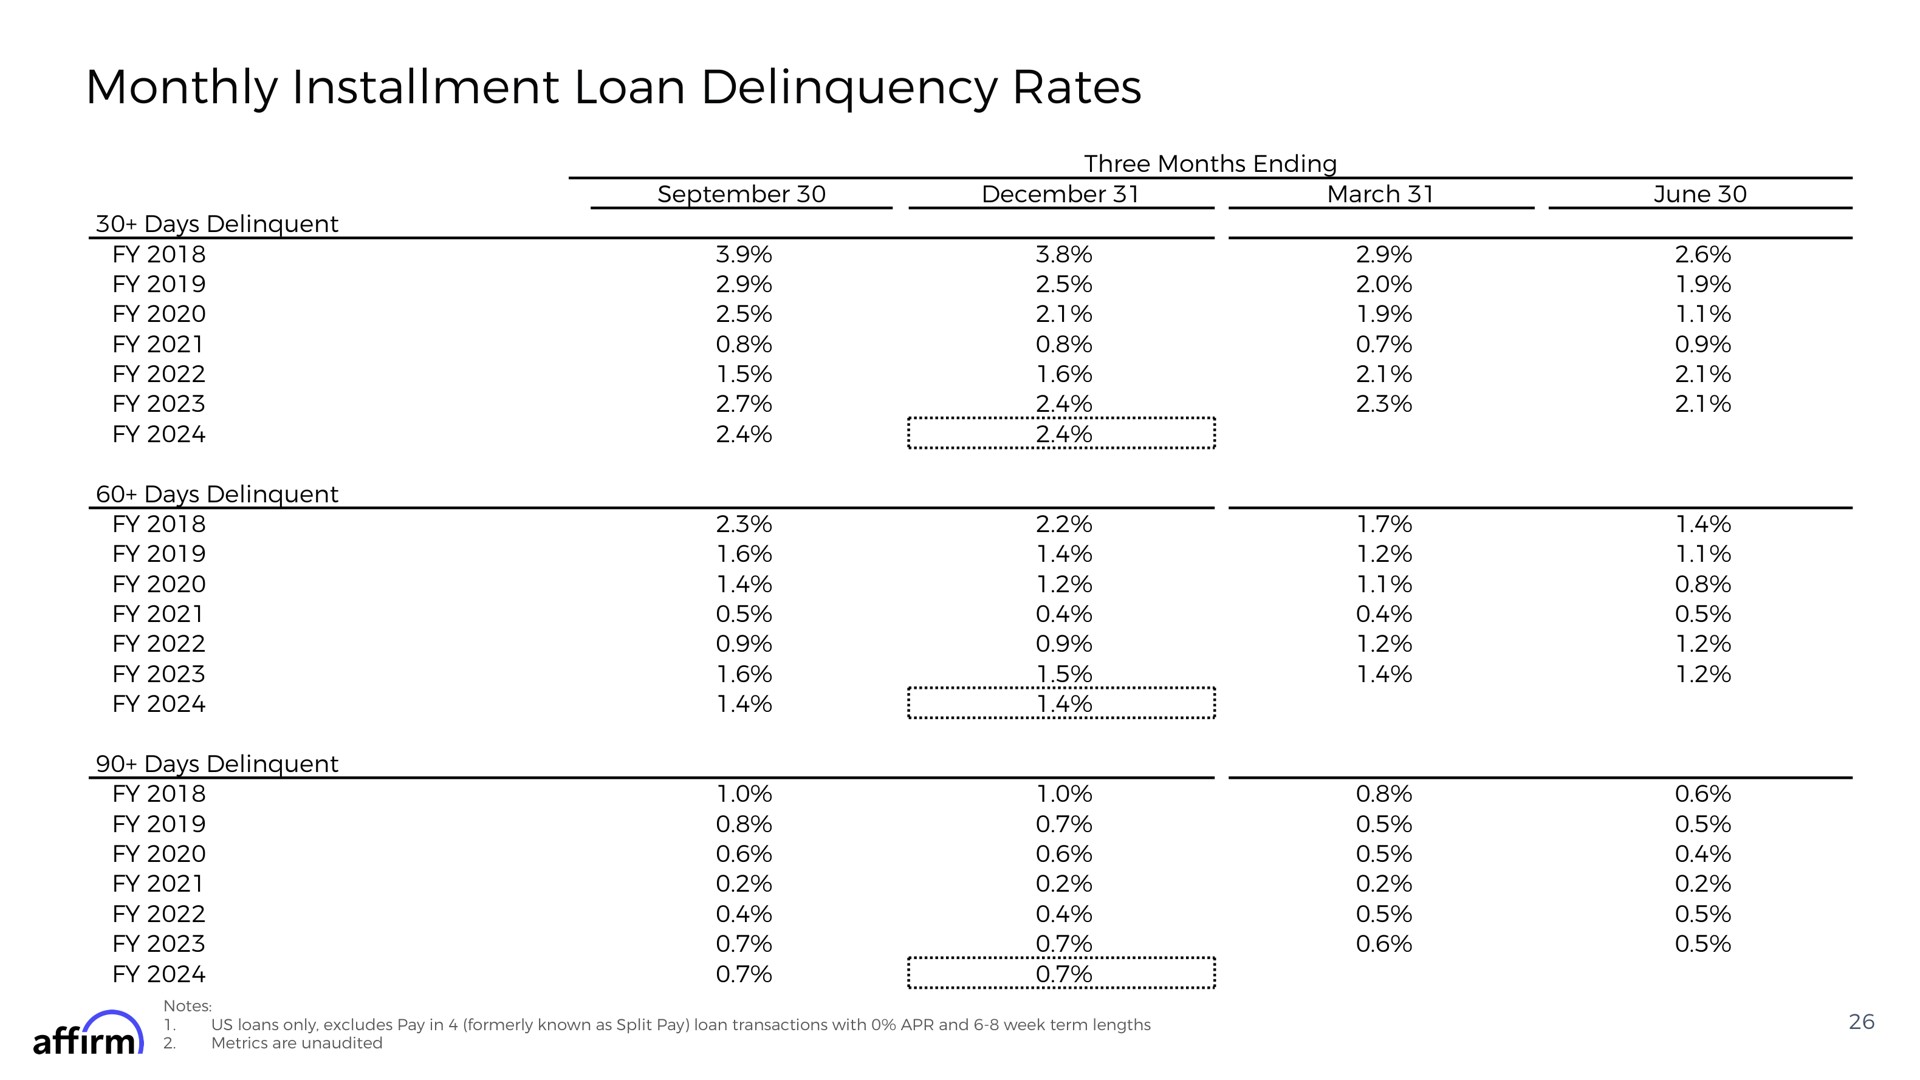 monthly installment loan delinquency rates a mand | Affirm